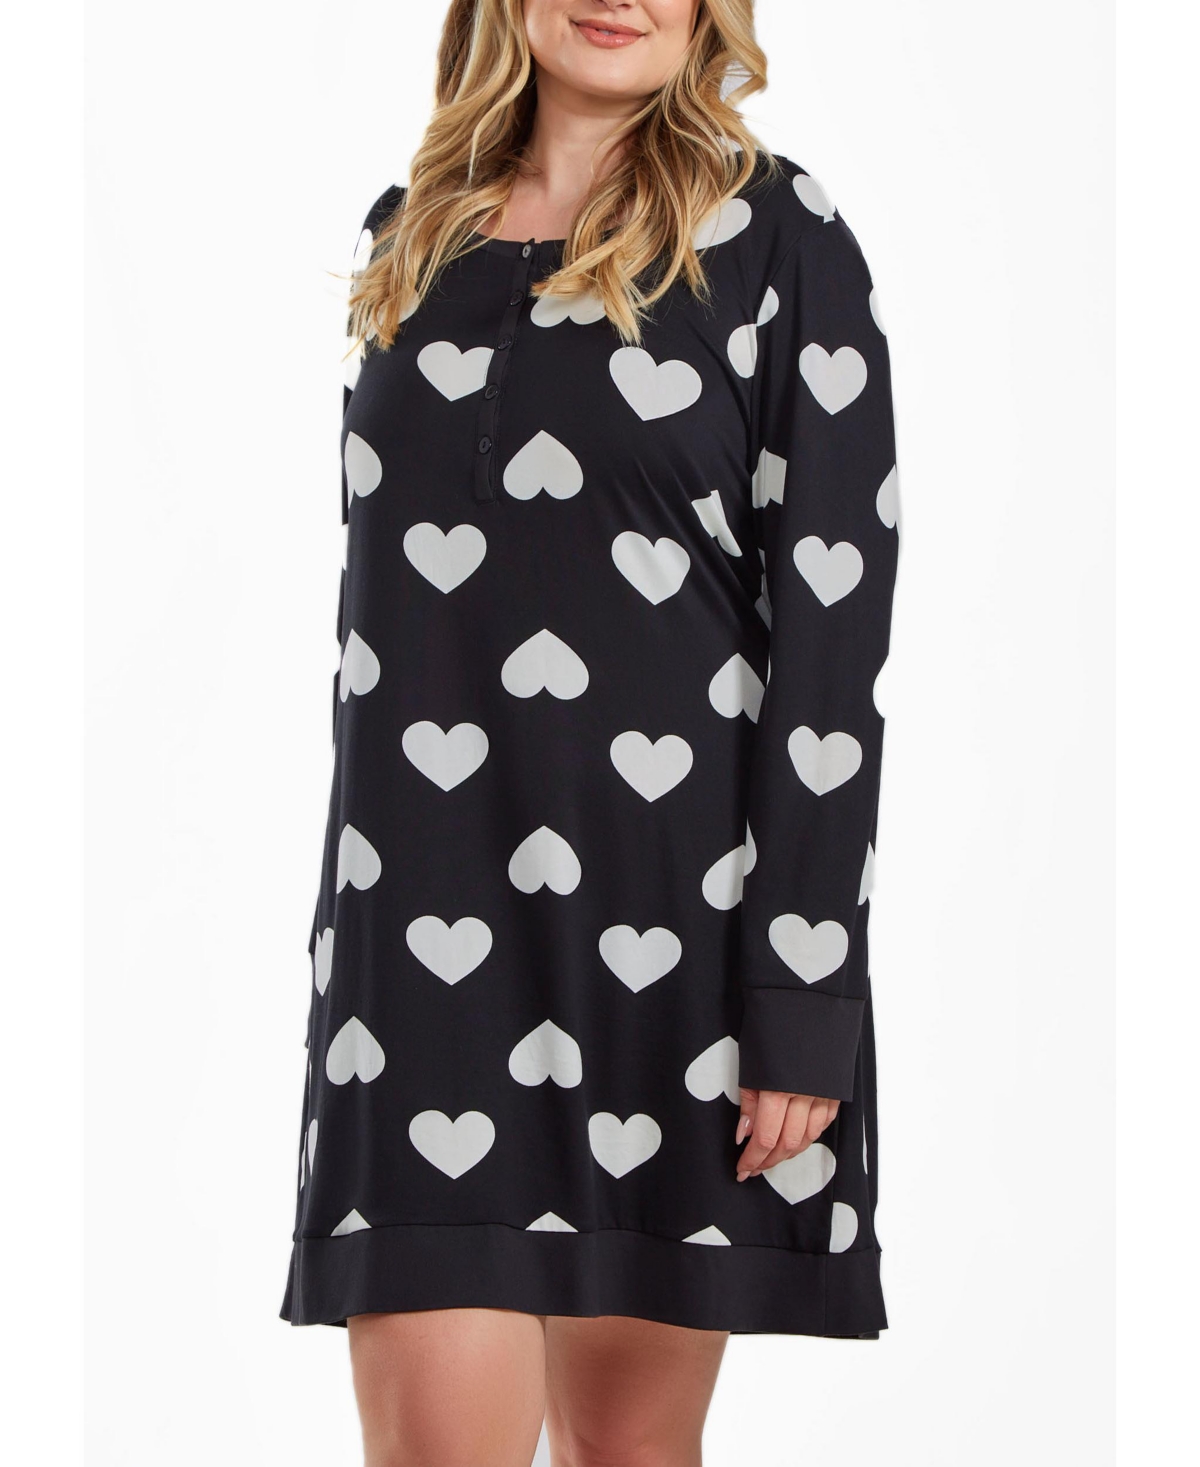 Shop Icollection Kind Heart Plus Size Modal Sleep Top Or Dress With Button Down Top In Comfy Cozy Style In Cream-black